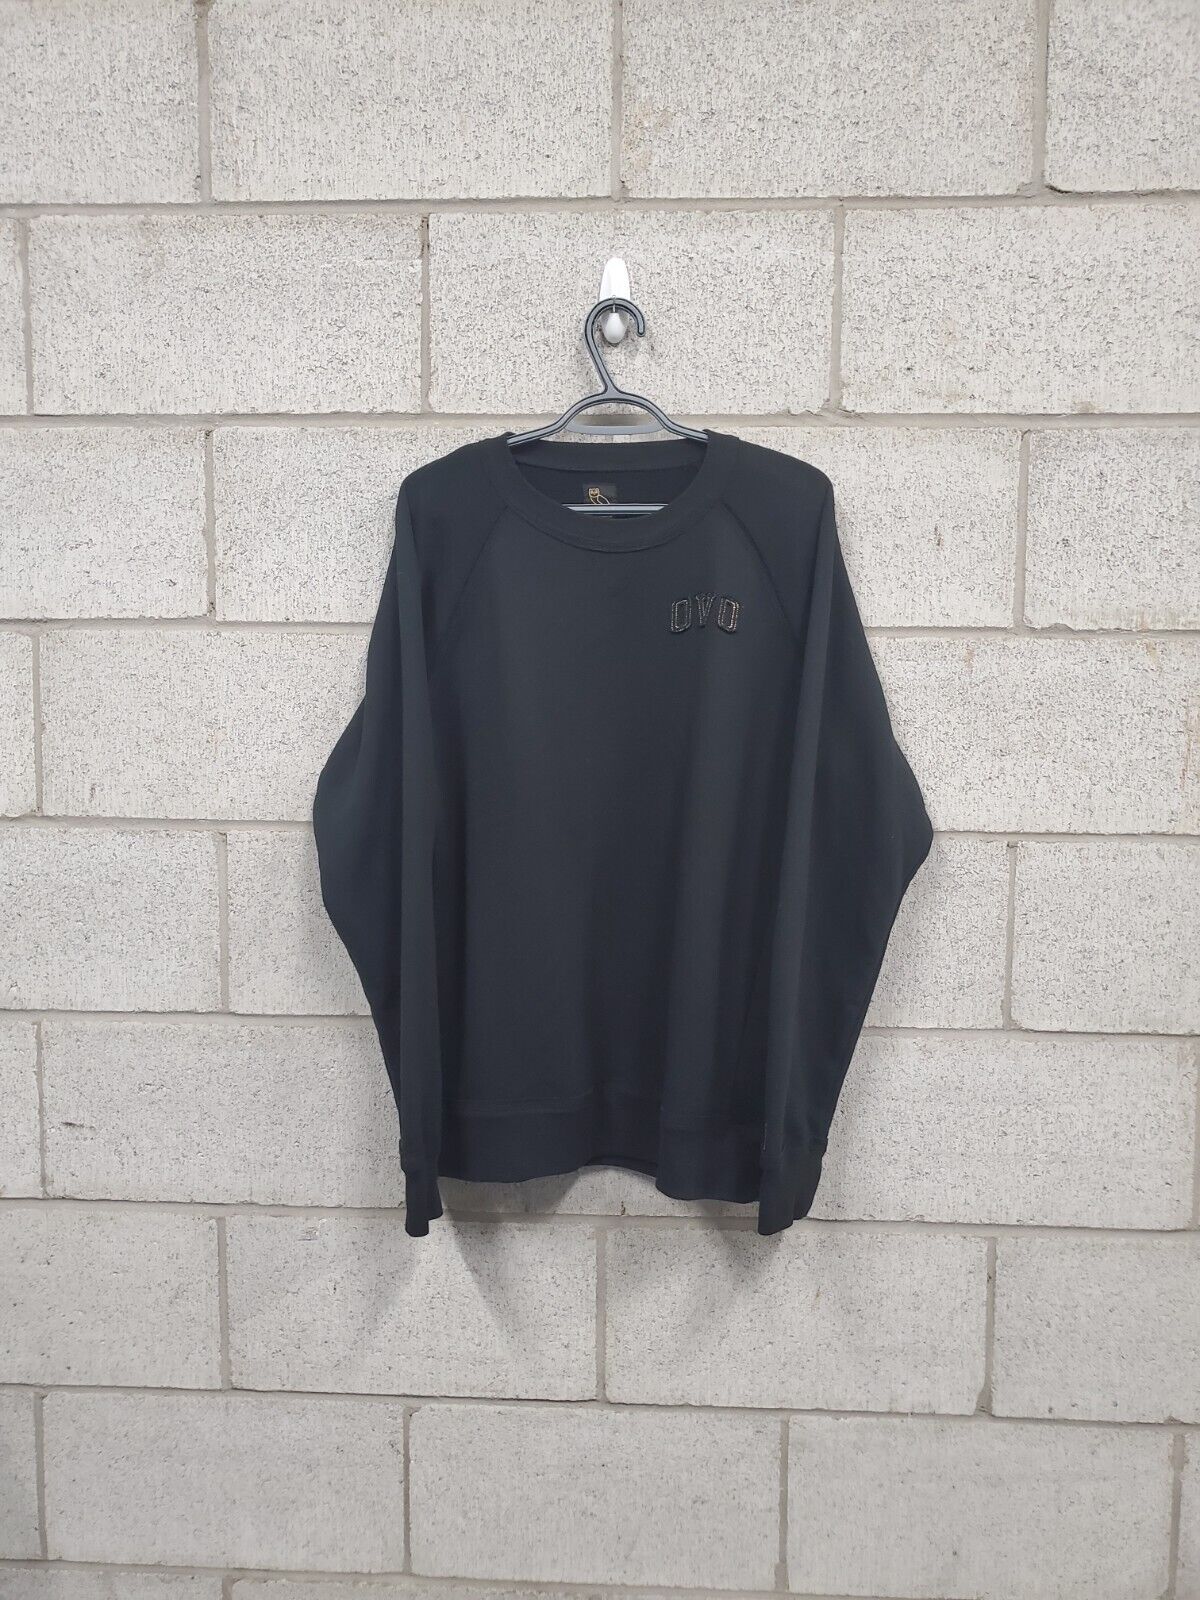 Mens October's Very Own OVO Crewneck Size XL